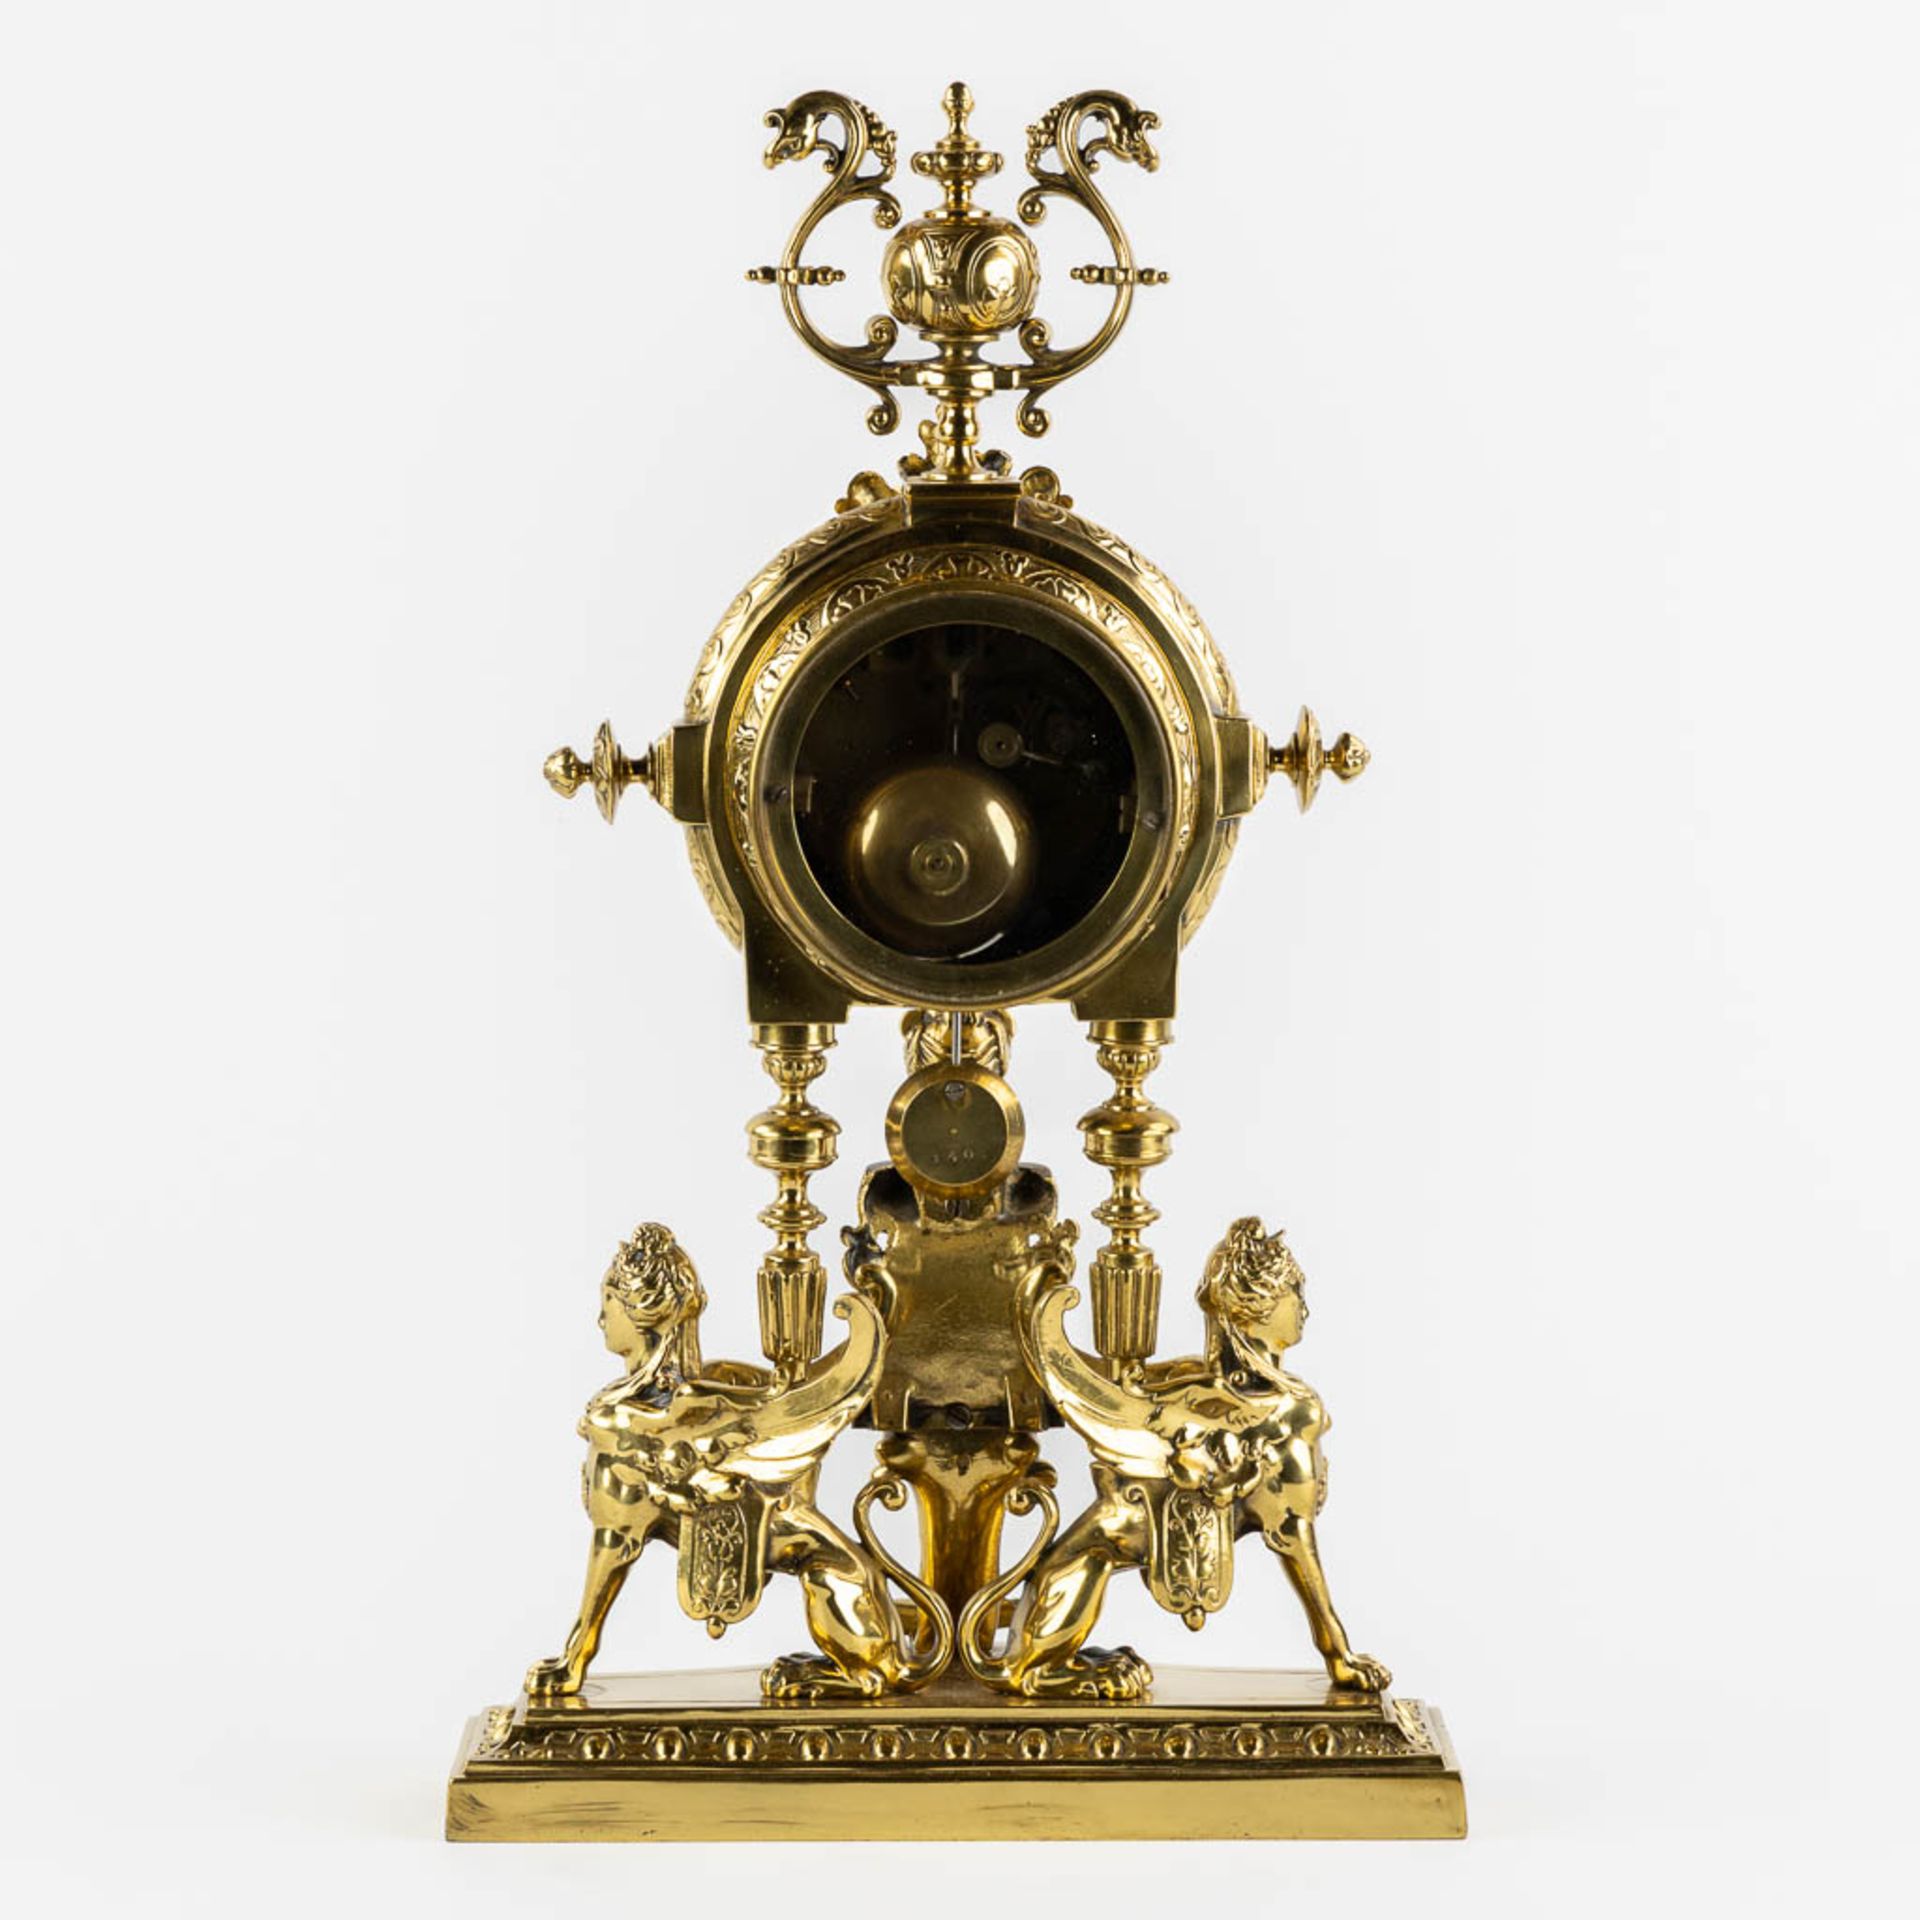 A mantle clock, polished bronze, decorated with Mythological Figures. Circa 1880. (L:15 x W:26 x H:4 - Image 5 of 12